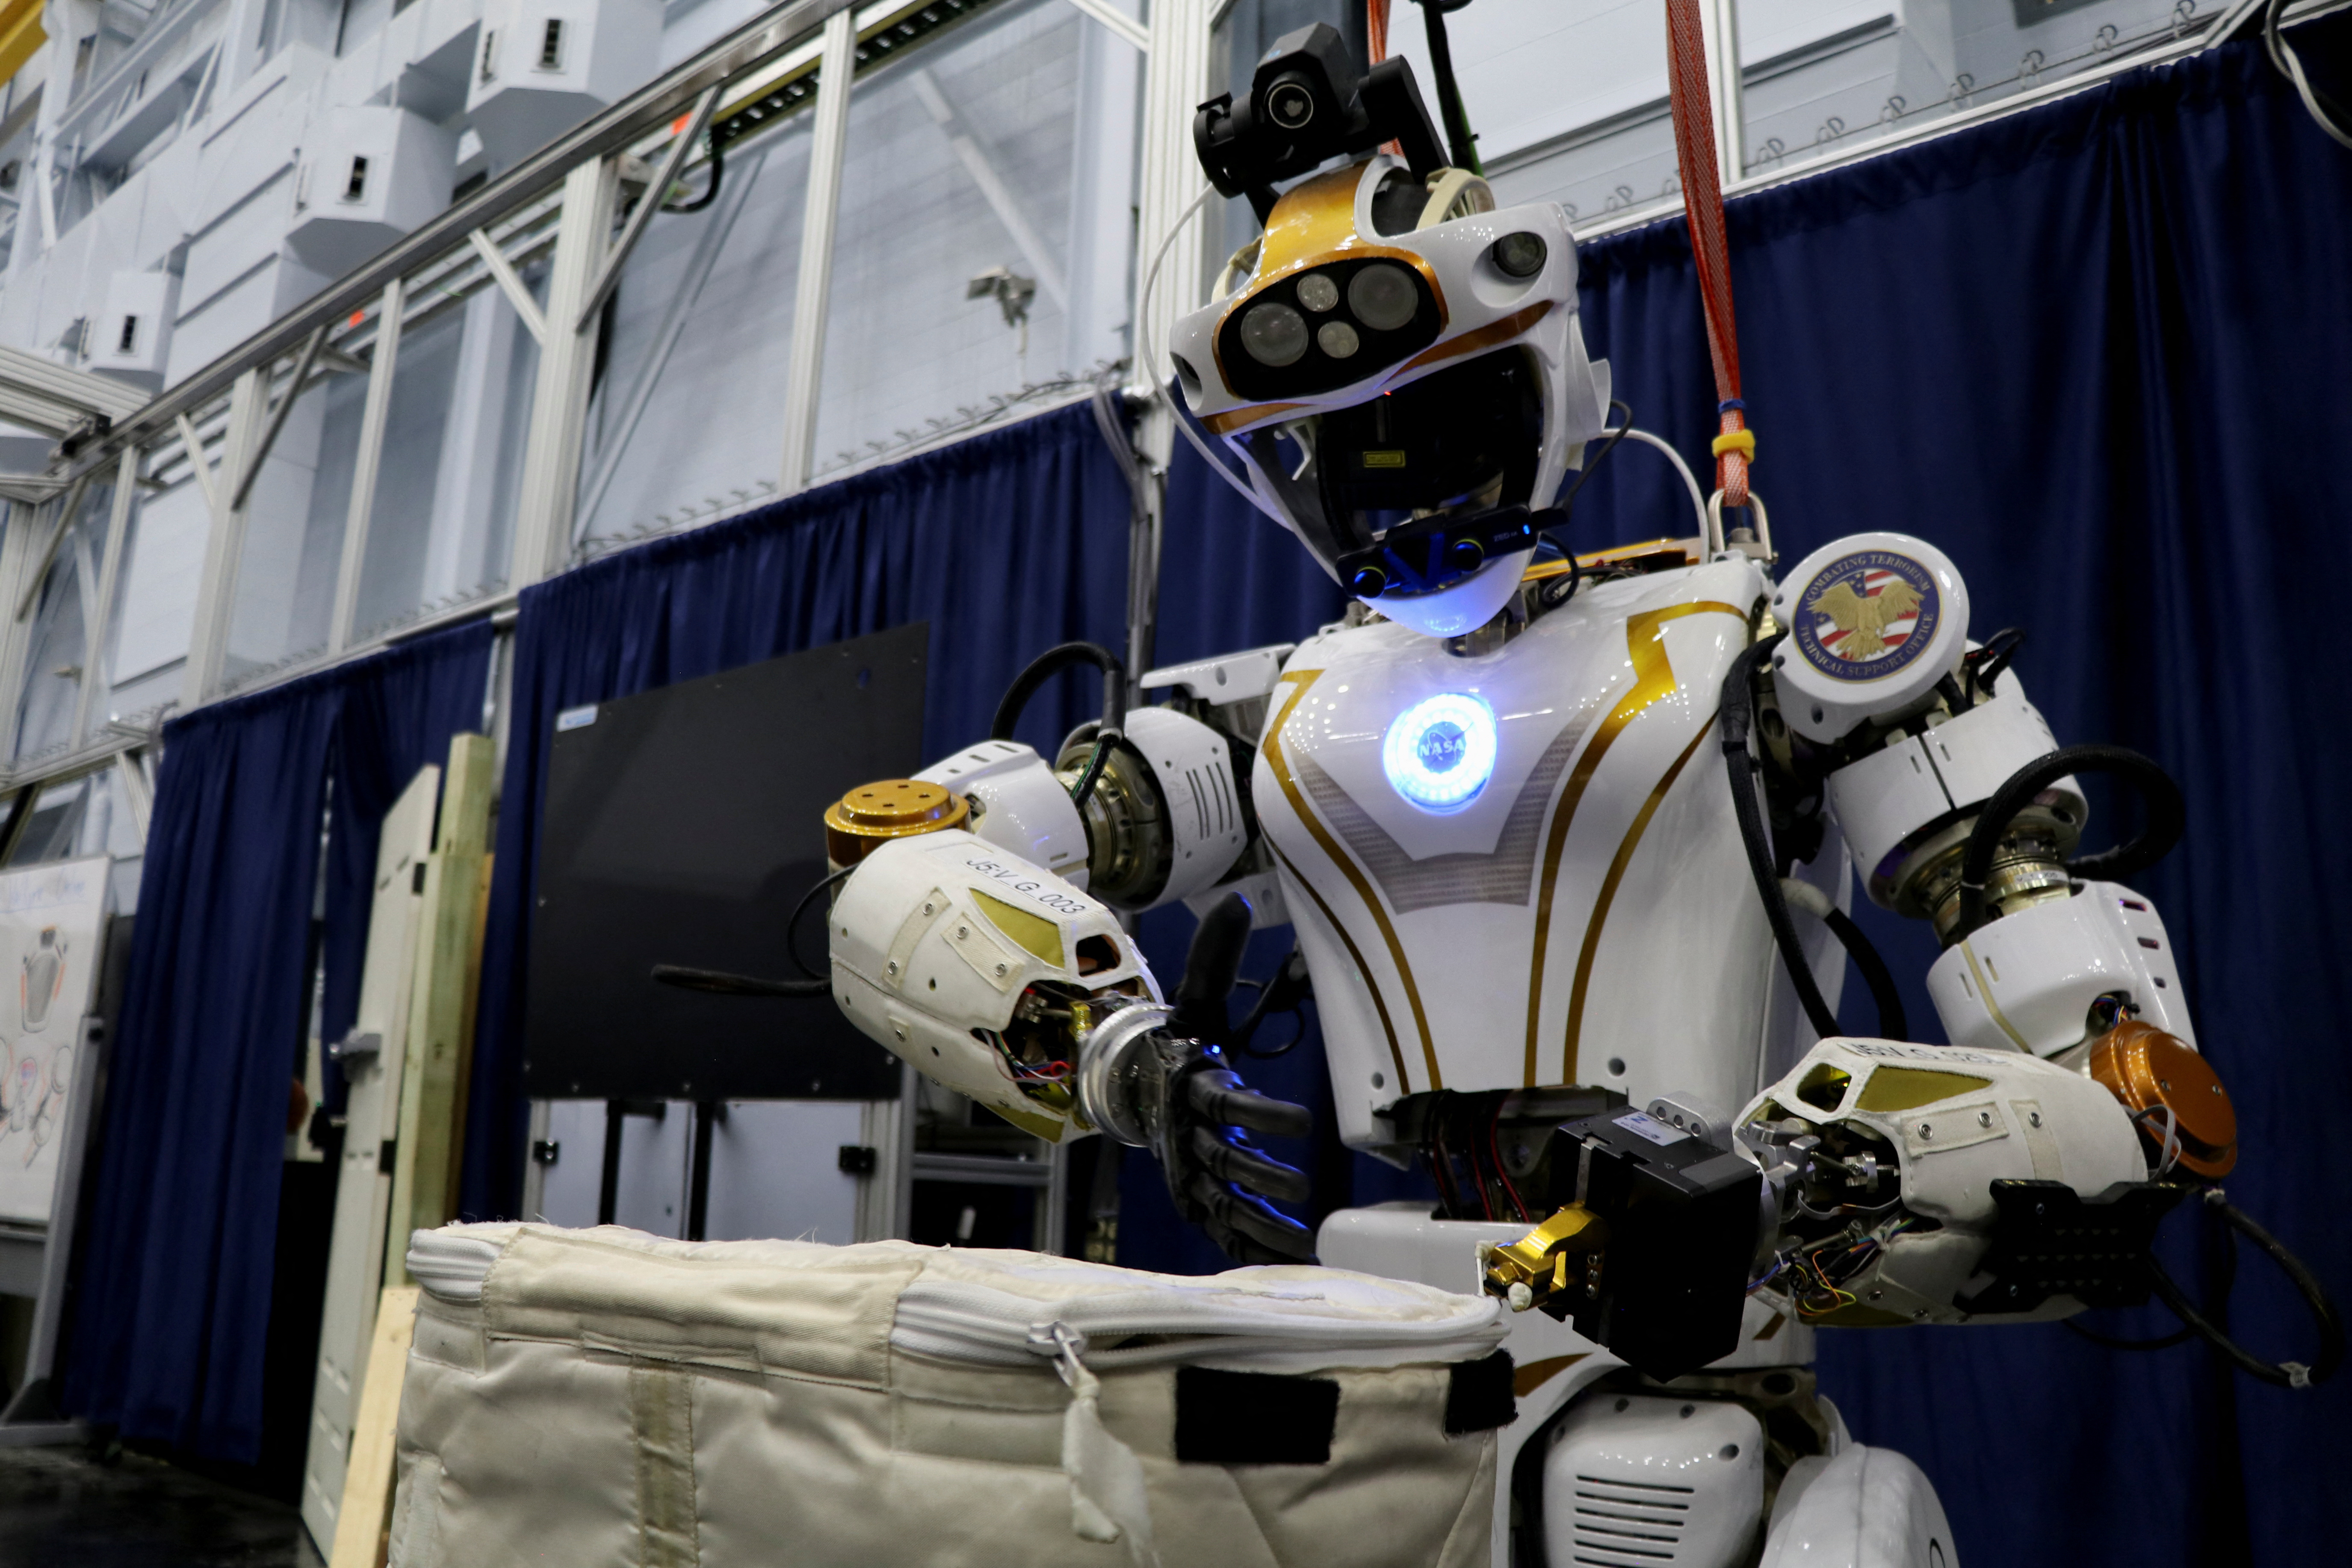 Wow! This new NASA space technology bid looks to turn Science Fiction into  Reality